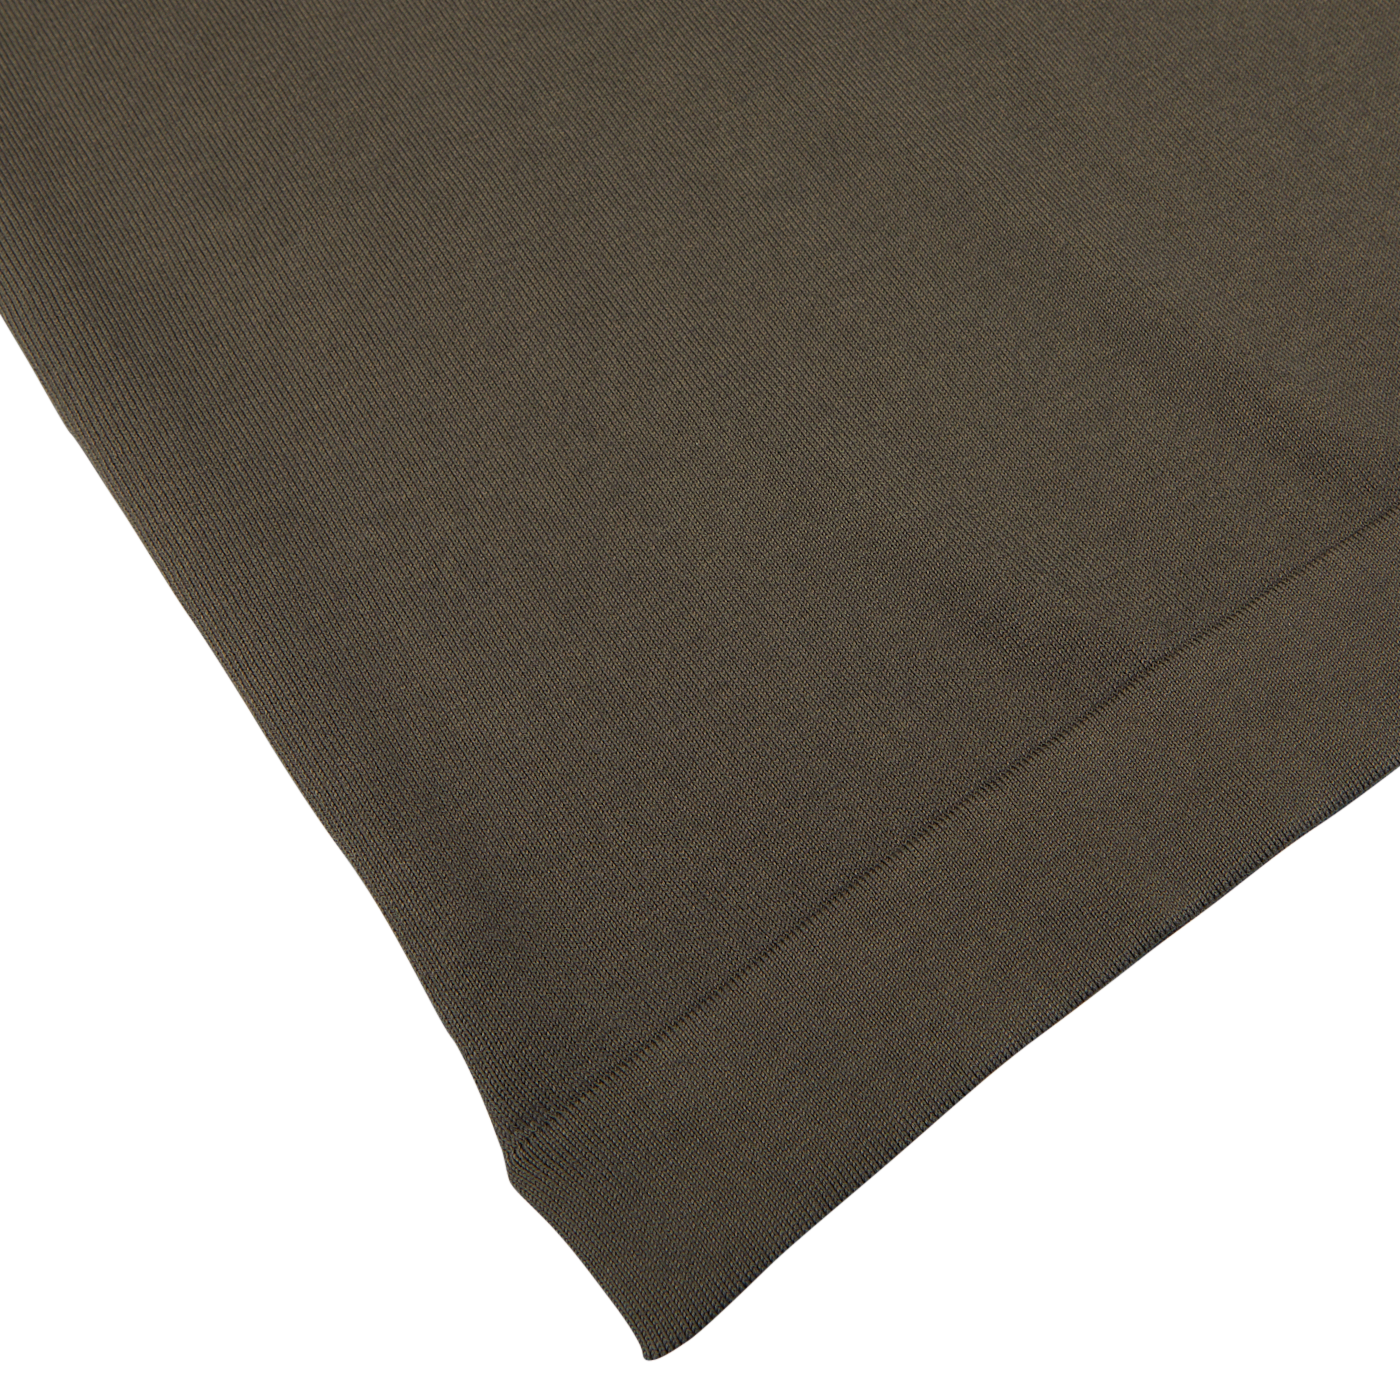 Folded Gran Sasso Olive Green Organic Cotton T-shirt on a white background.